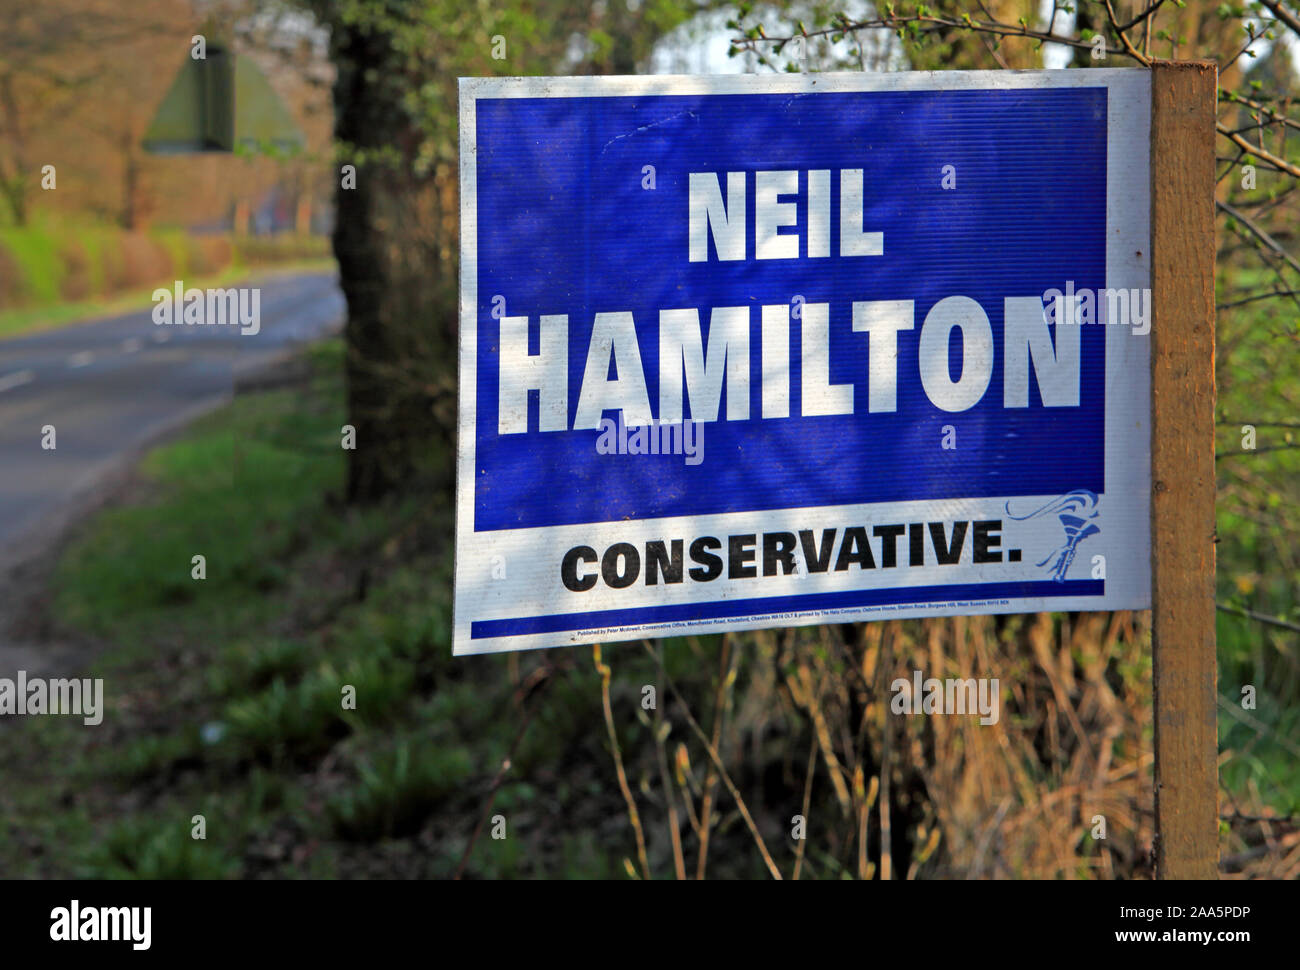 Neil Hamilton, Vote Conservative sign, General Election Knutsford Tatton Ward, Cheshire, North West England, UK, Tory sleaze, lies & grifting Stock Photo